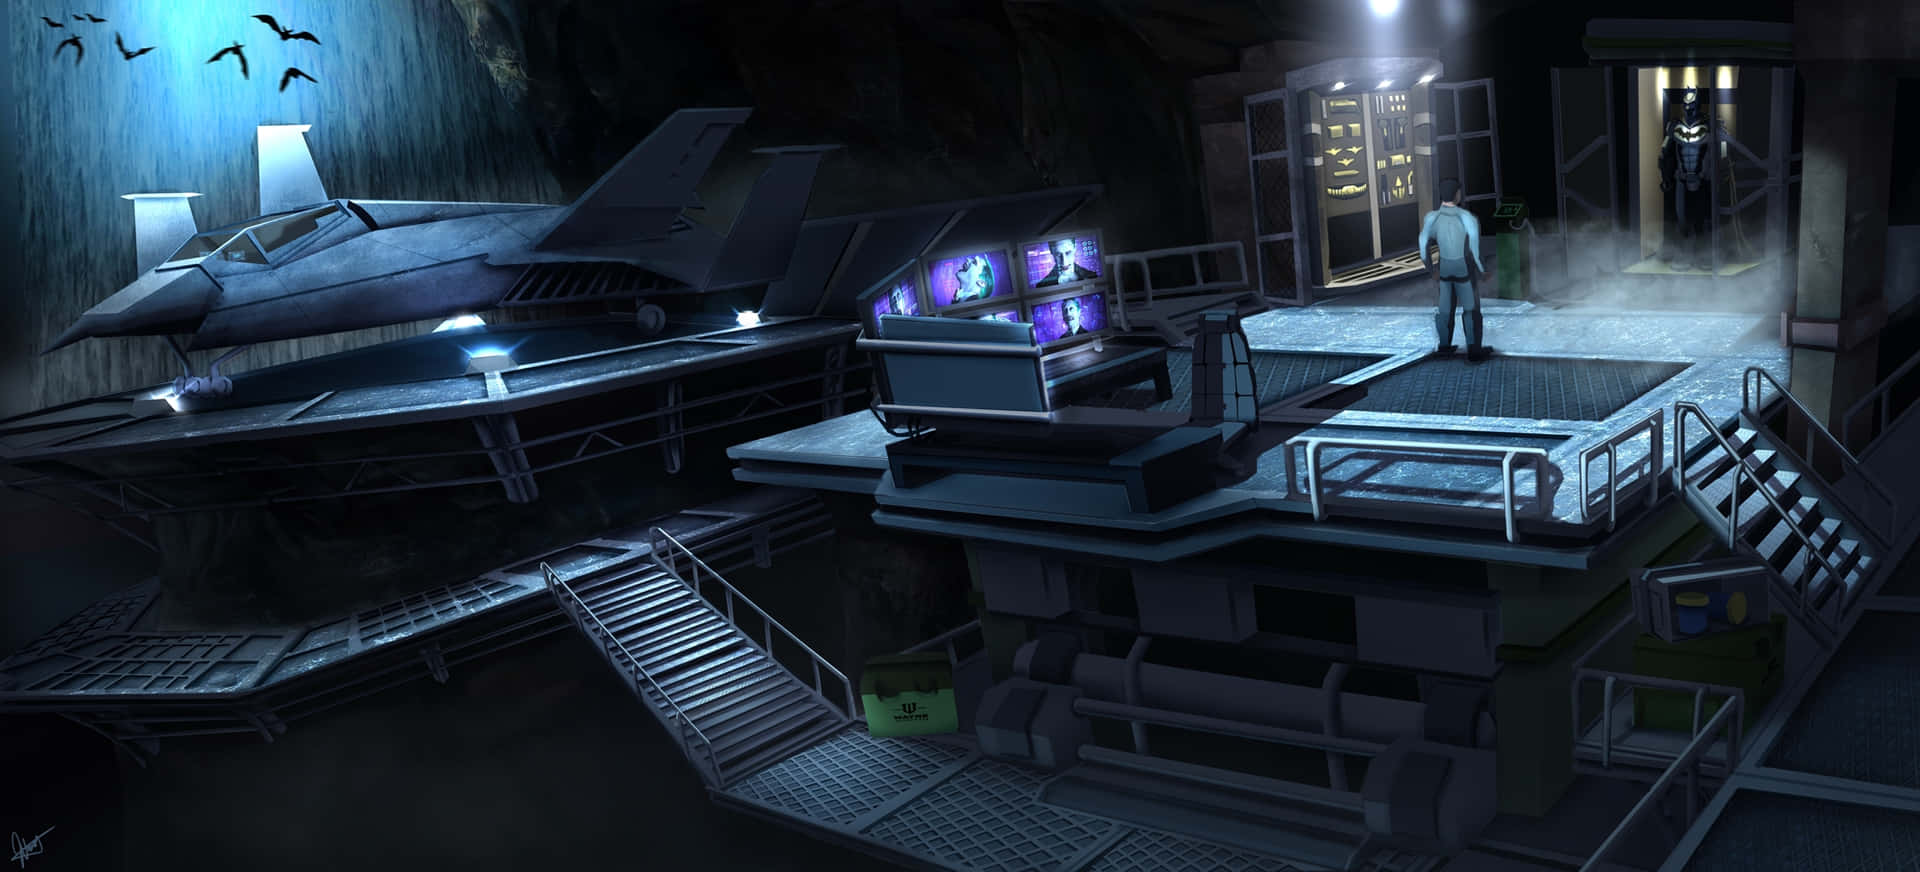 "We welcome you to the Batcave--the headquarters of the legendary Batman." Wallpaper